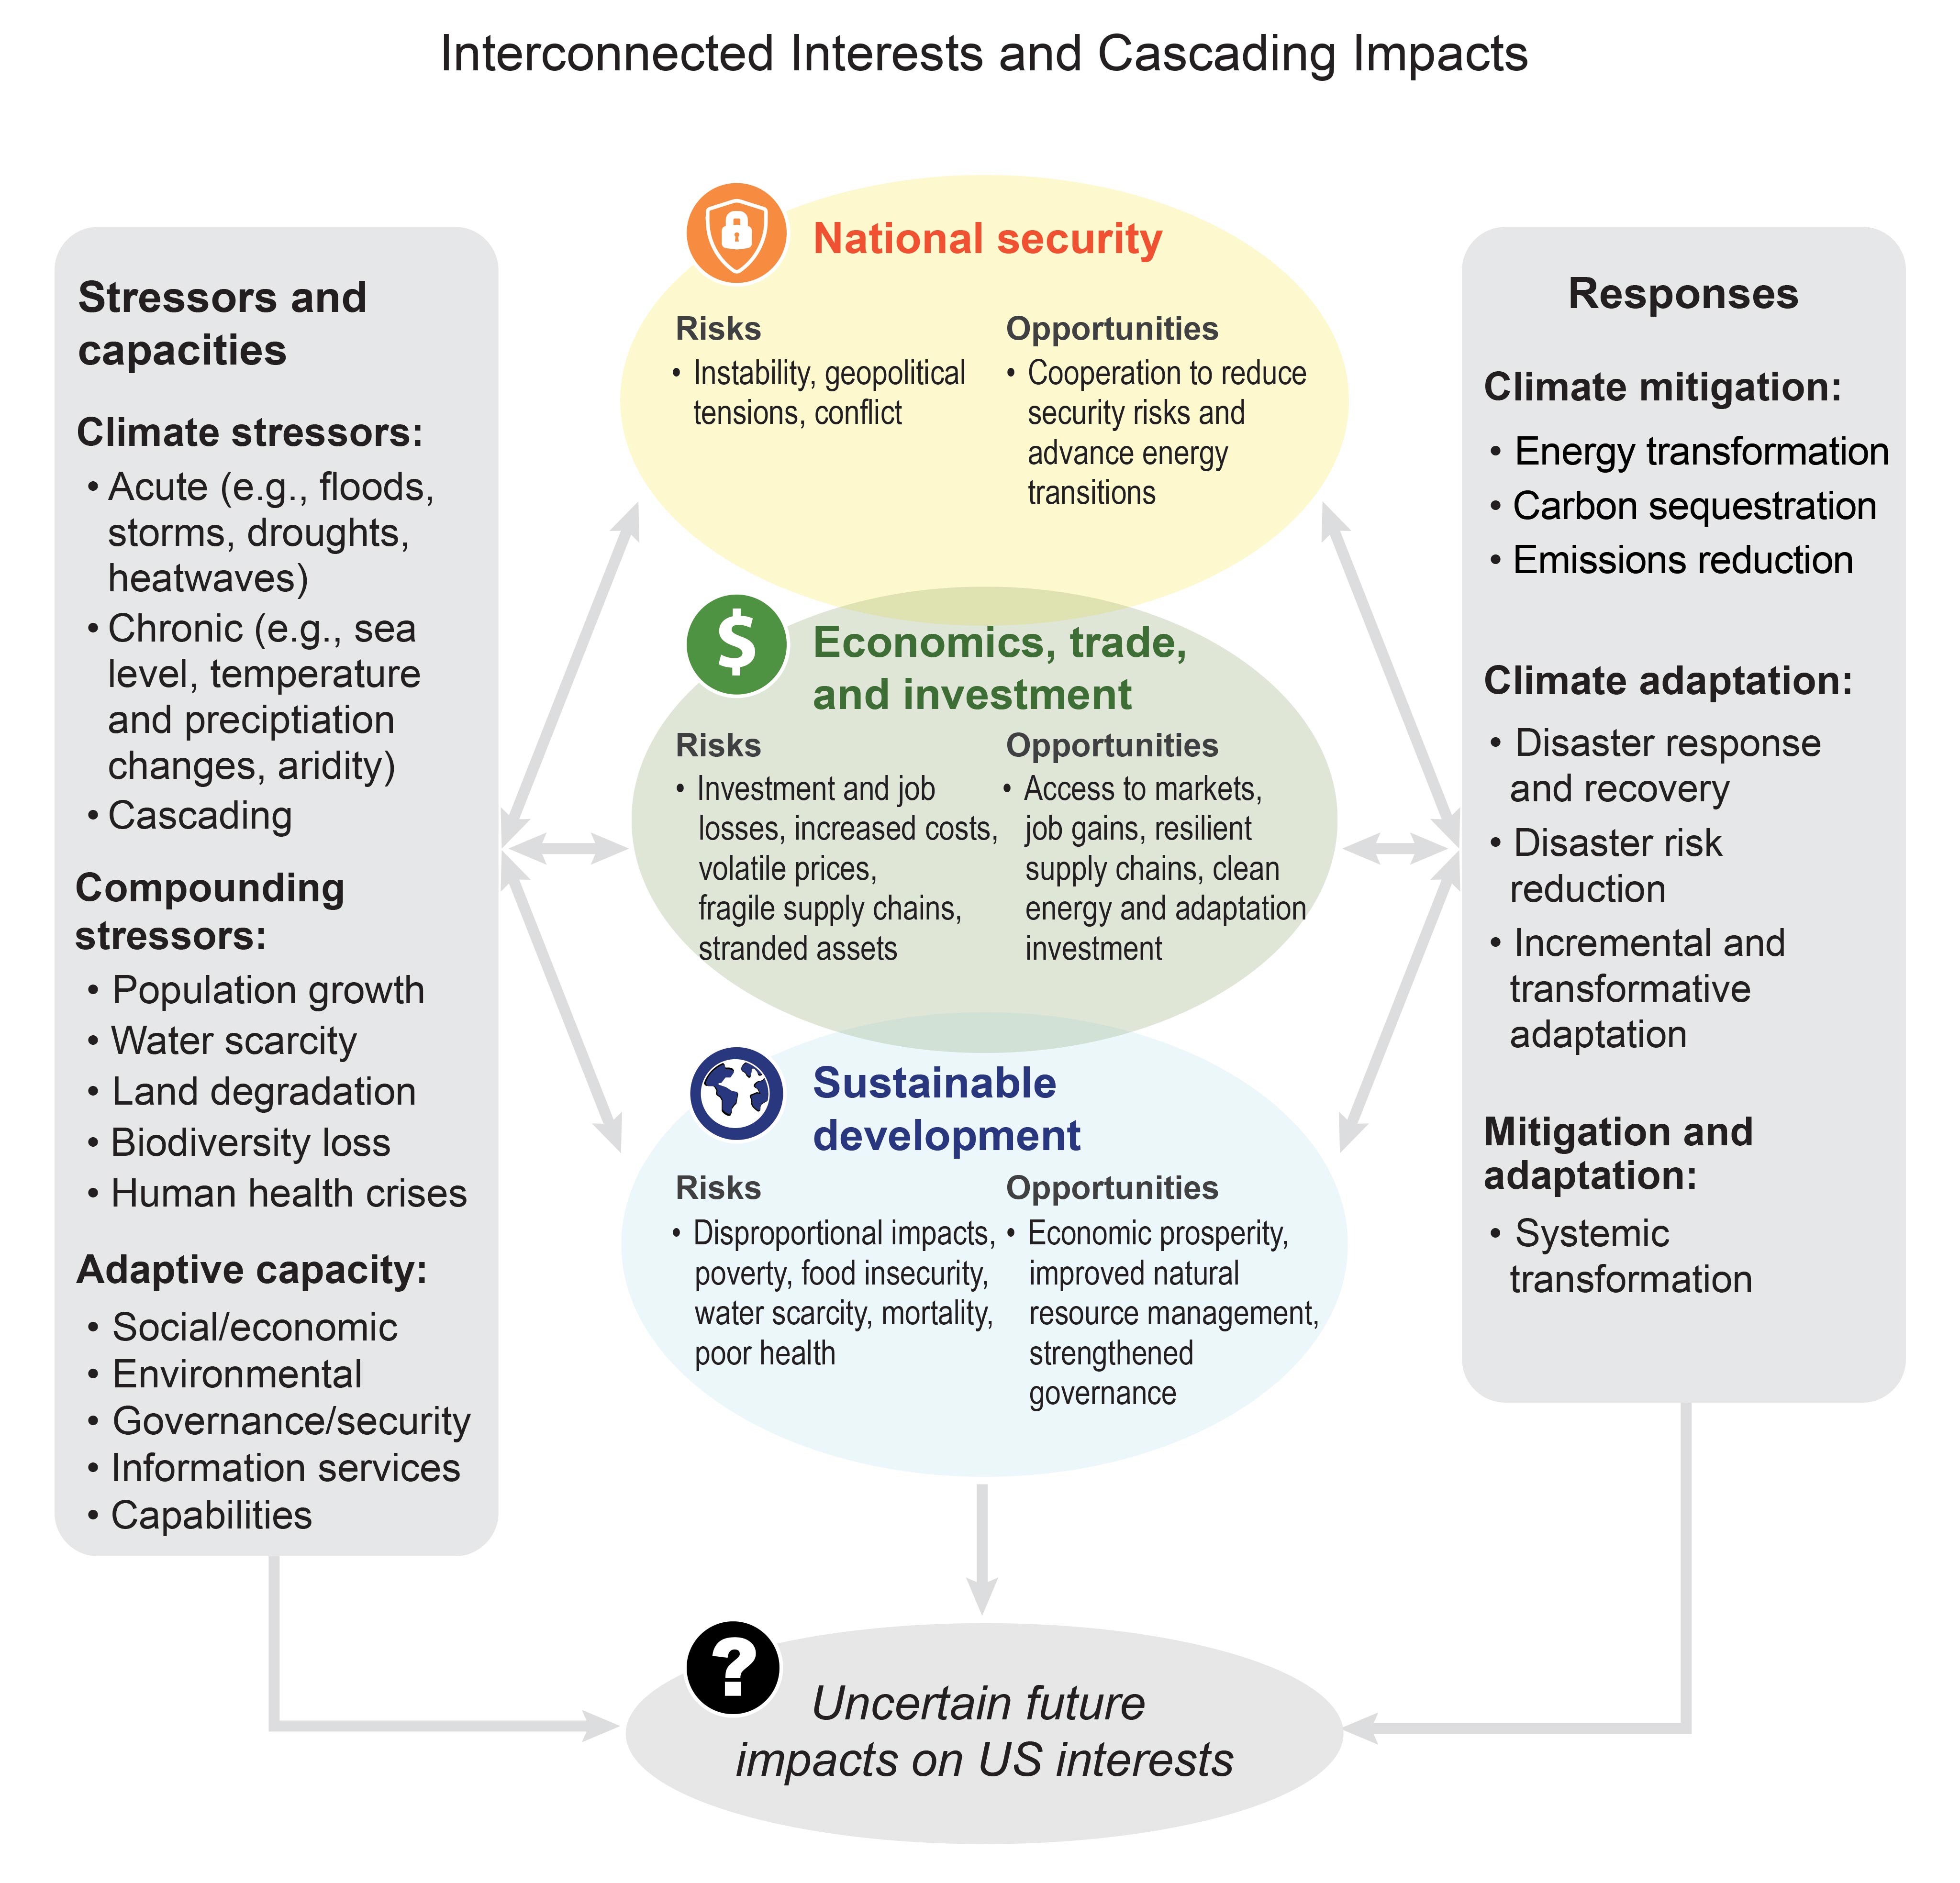 Interconnected Interests and Cascading Impacts